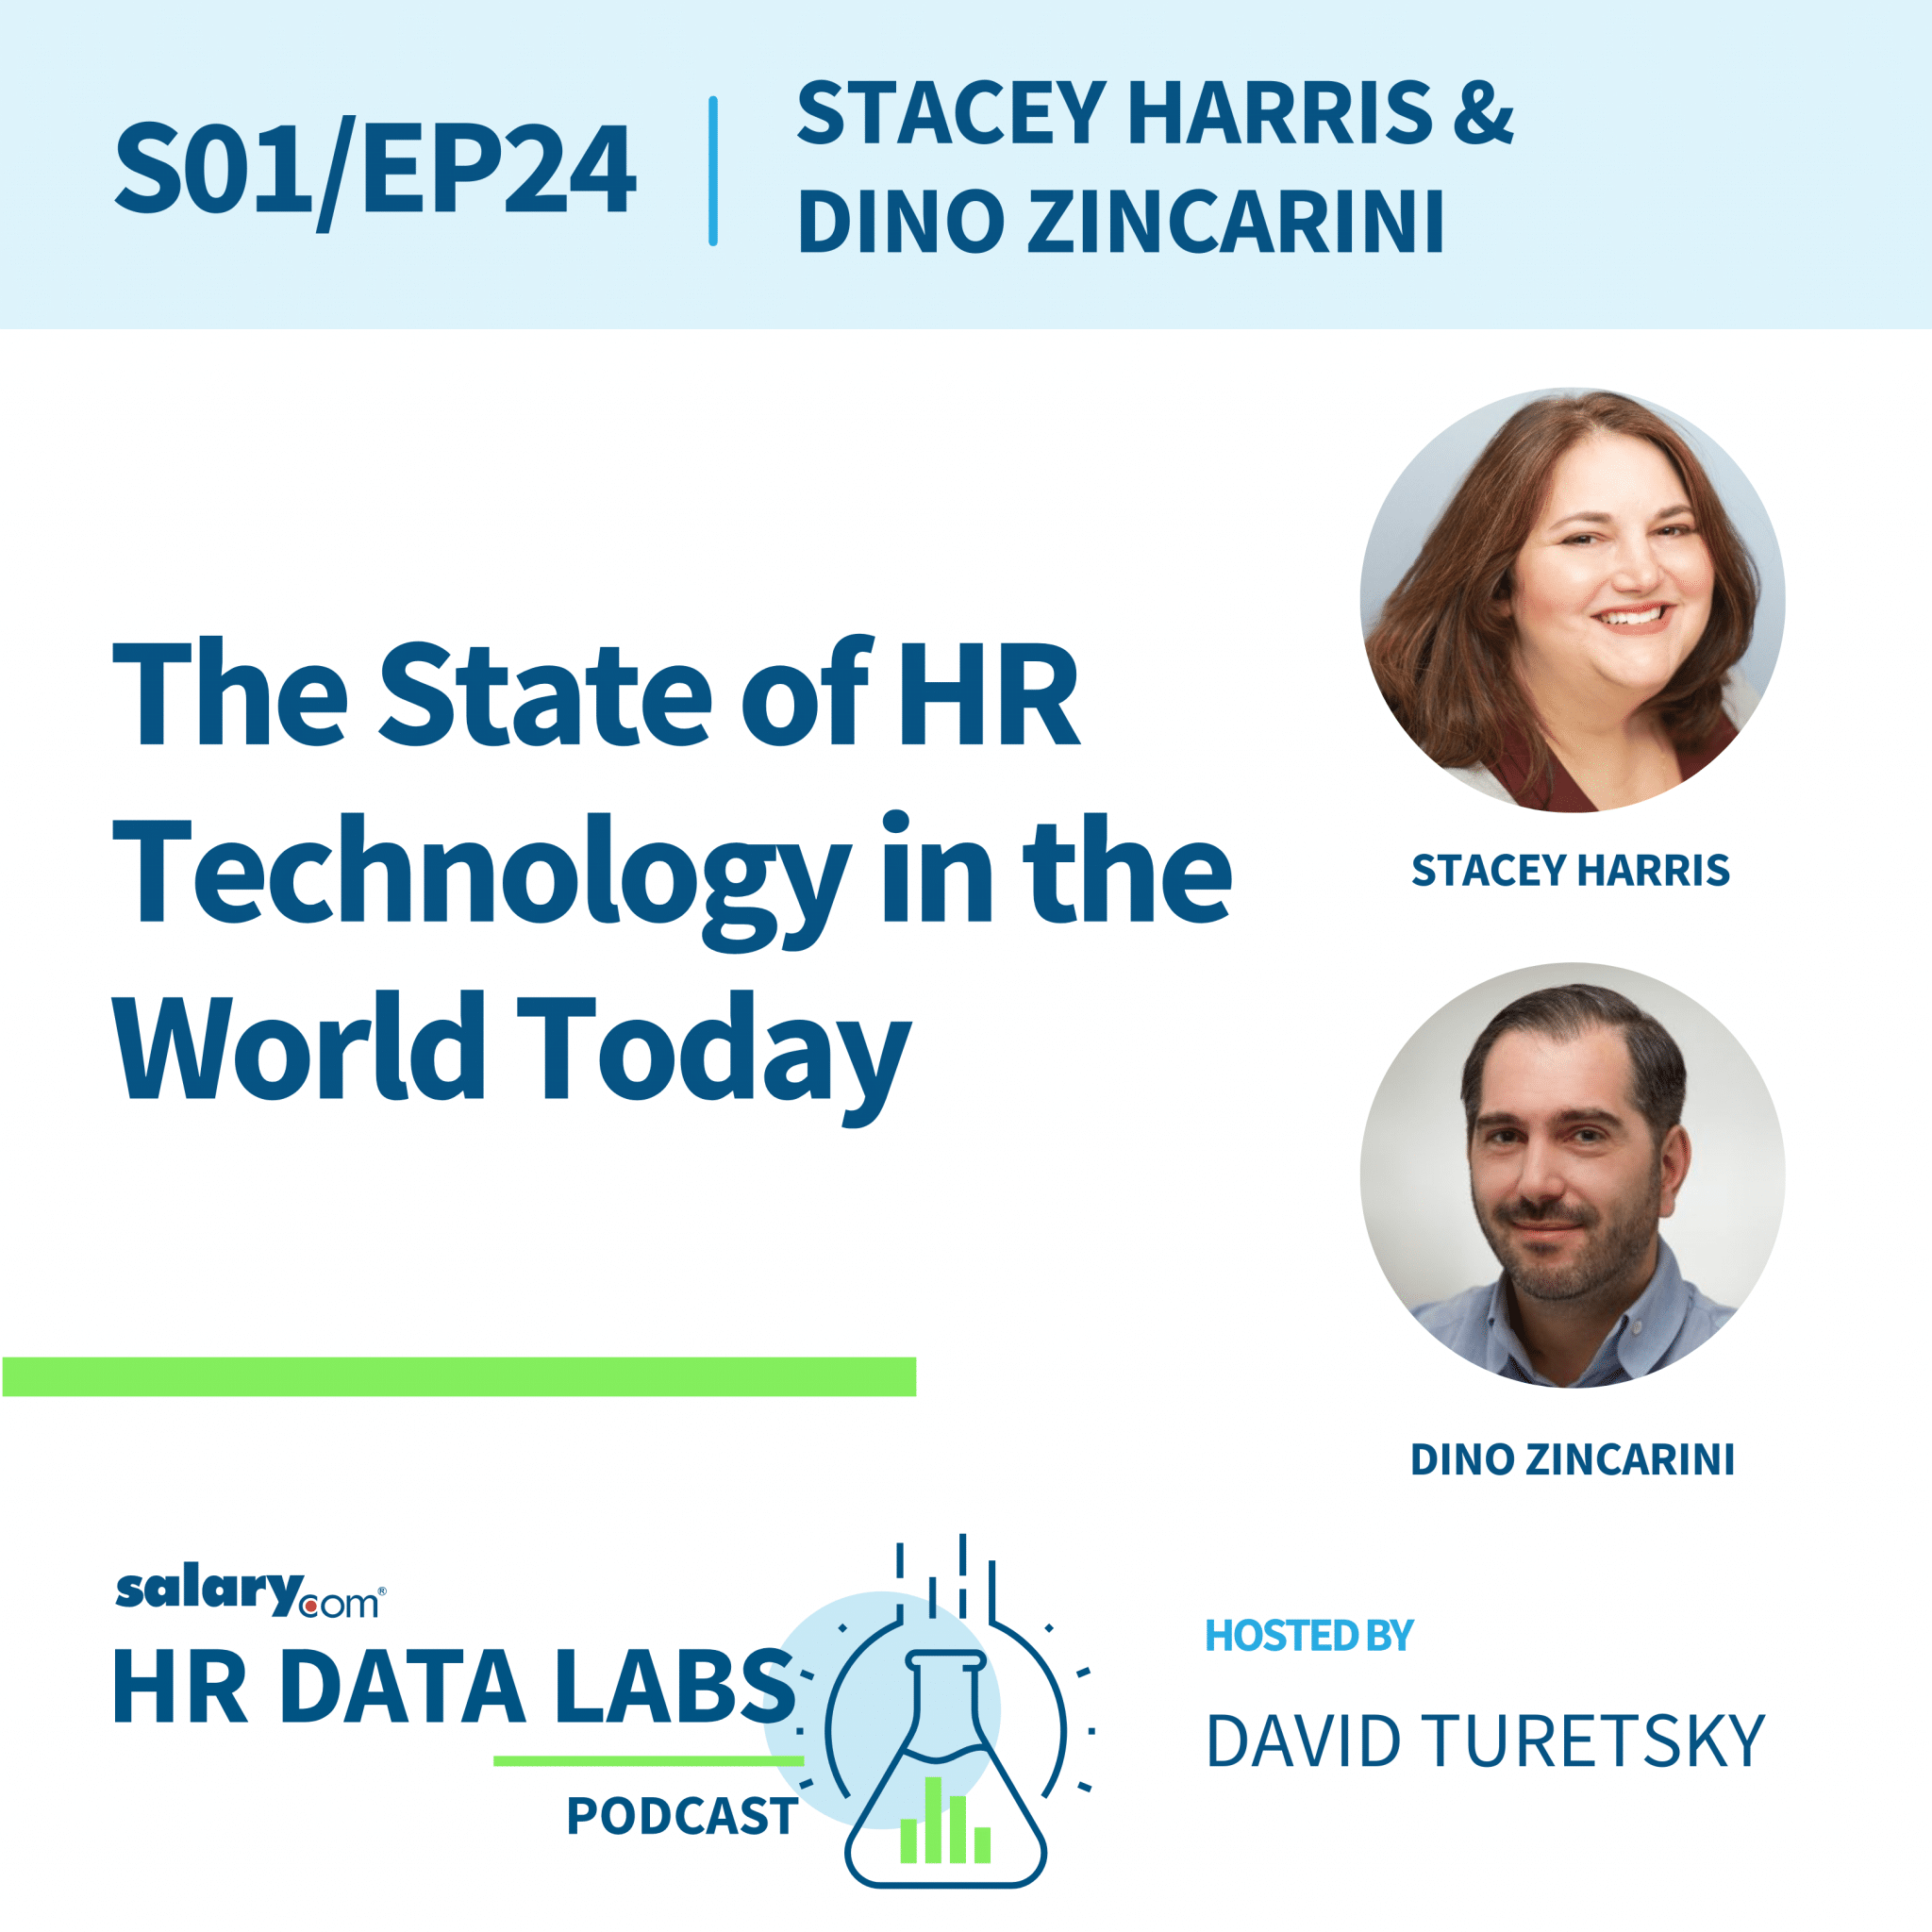 The State of HR Technology in the World Today